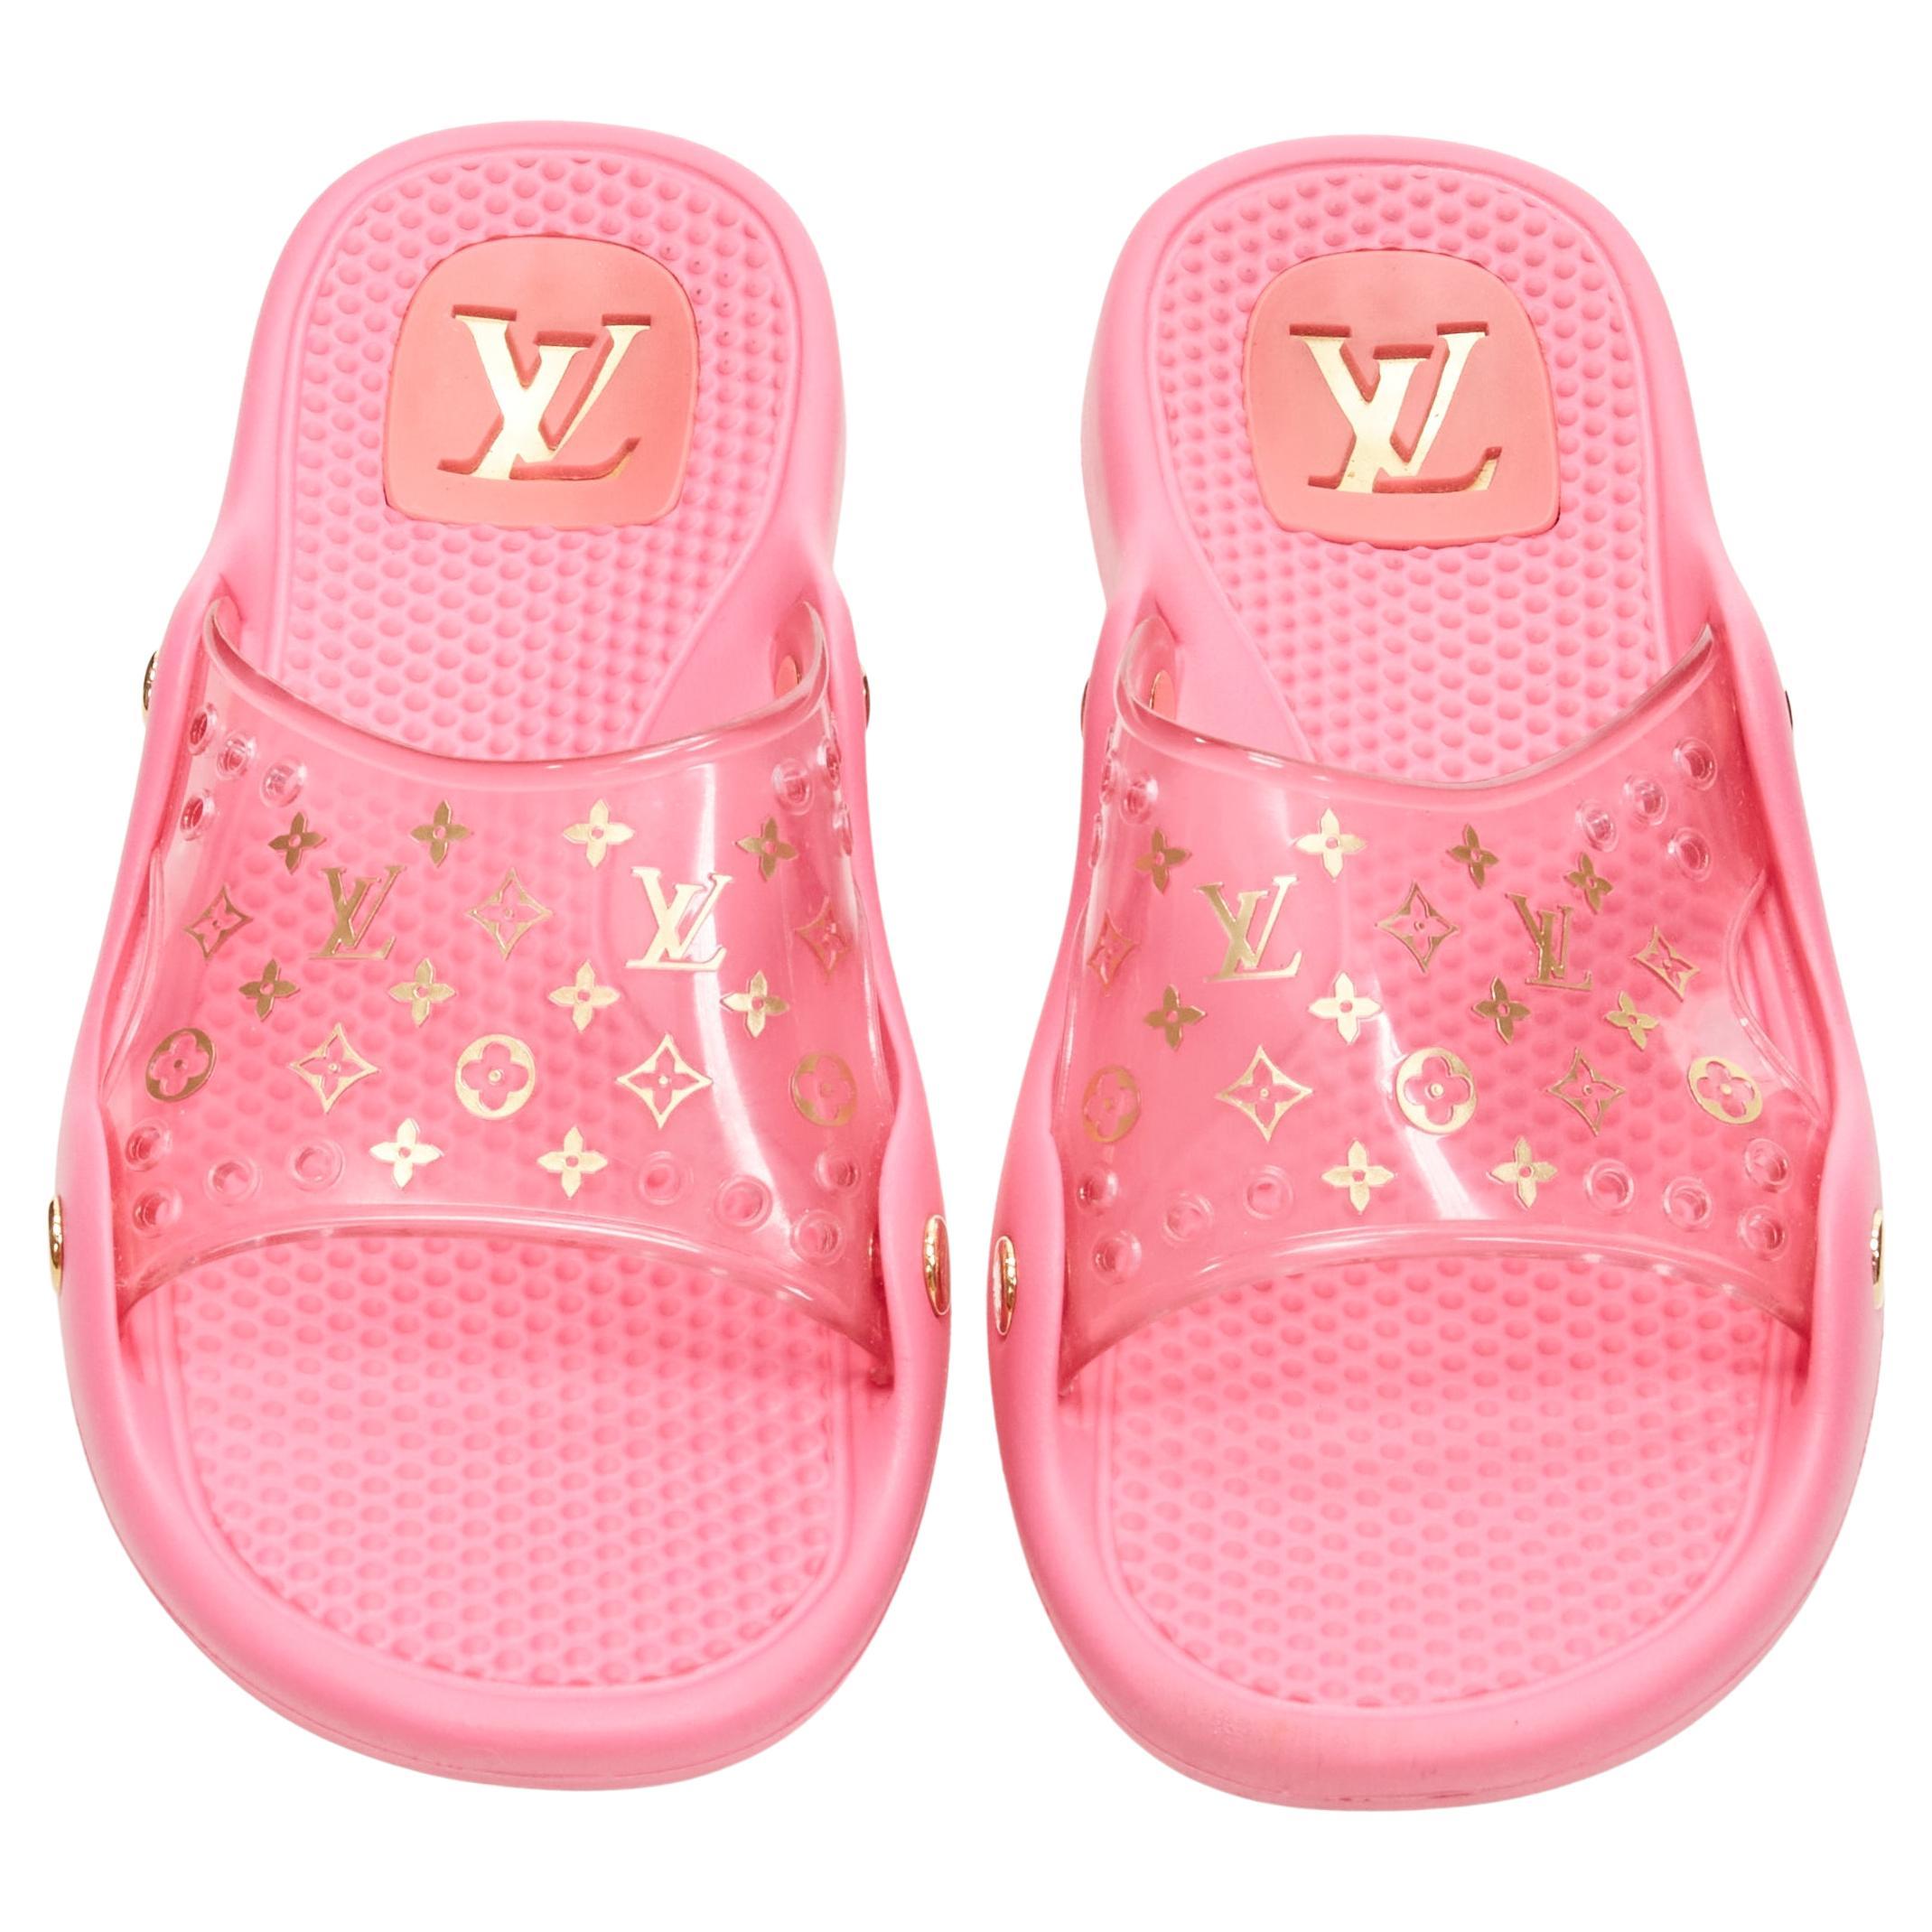 Lv Pink Slides Best Price In Pakistan, Rs 2000